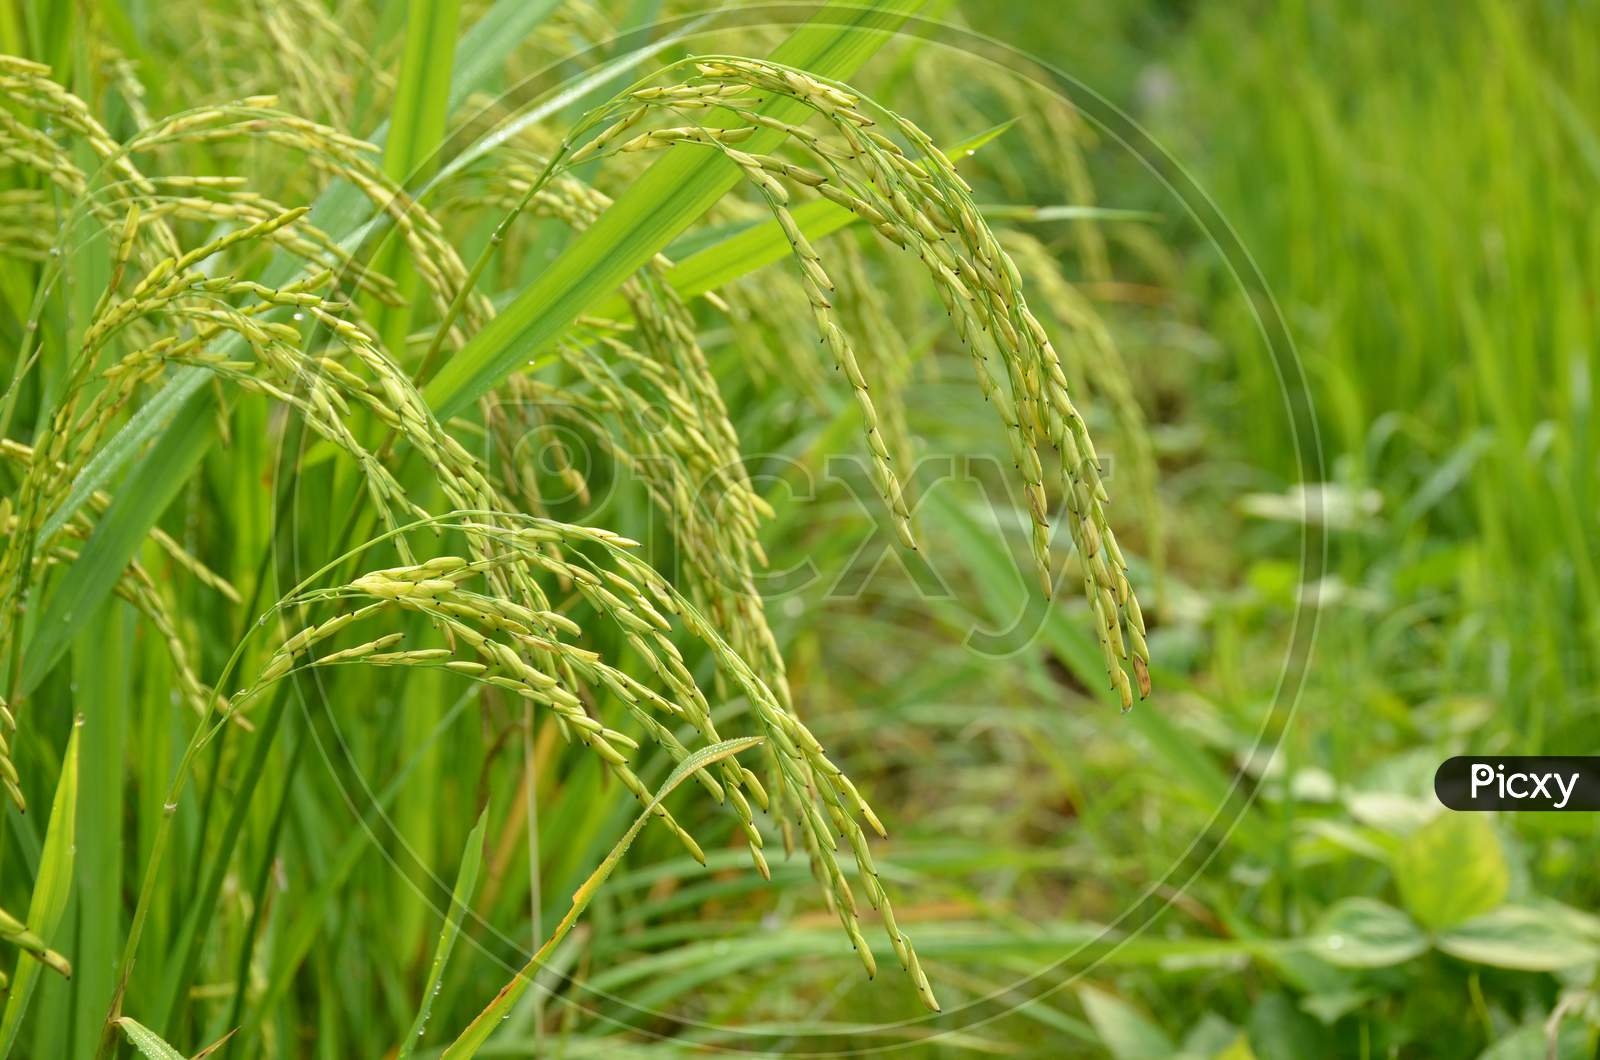 The Green Ripe Paddy Plant Grains In The Season.